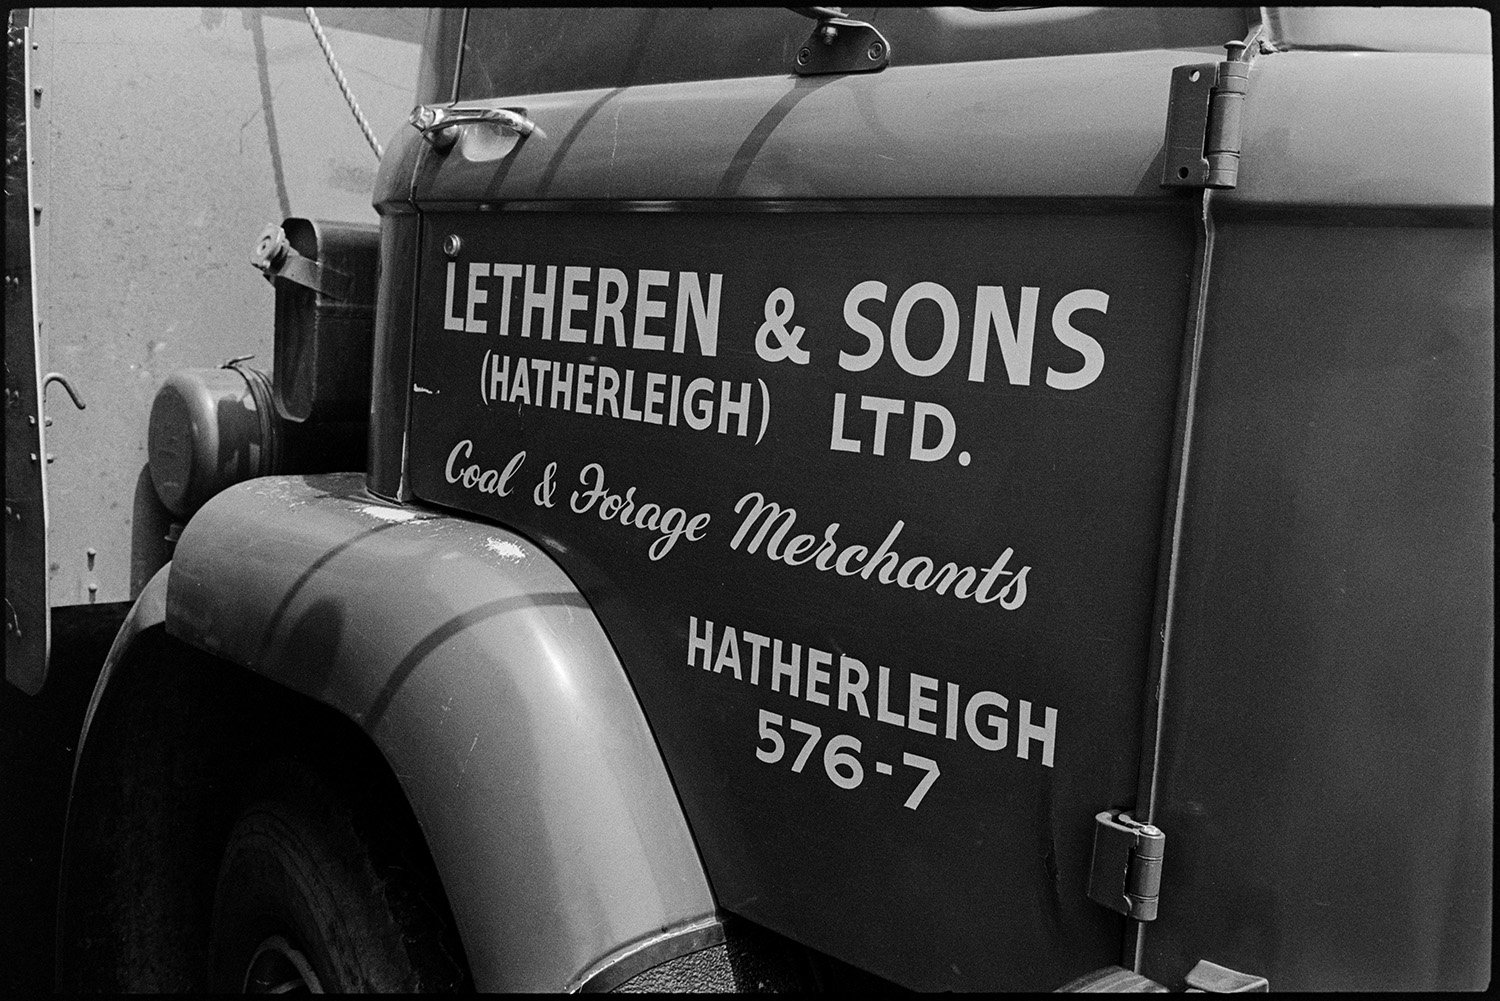 Sign on lorry. 
[The sign painted on a Letheren & Sons lorry reading 'Letheren & Sons (Hatherleigh) Ltd. Coal & Forage Merchants' at Hatherleigh Monument.]